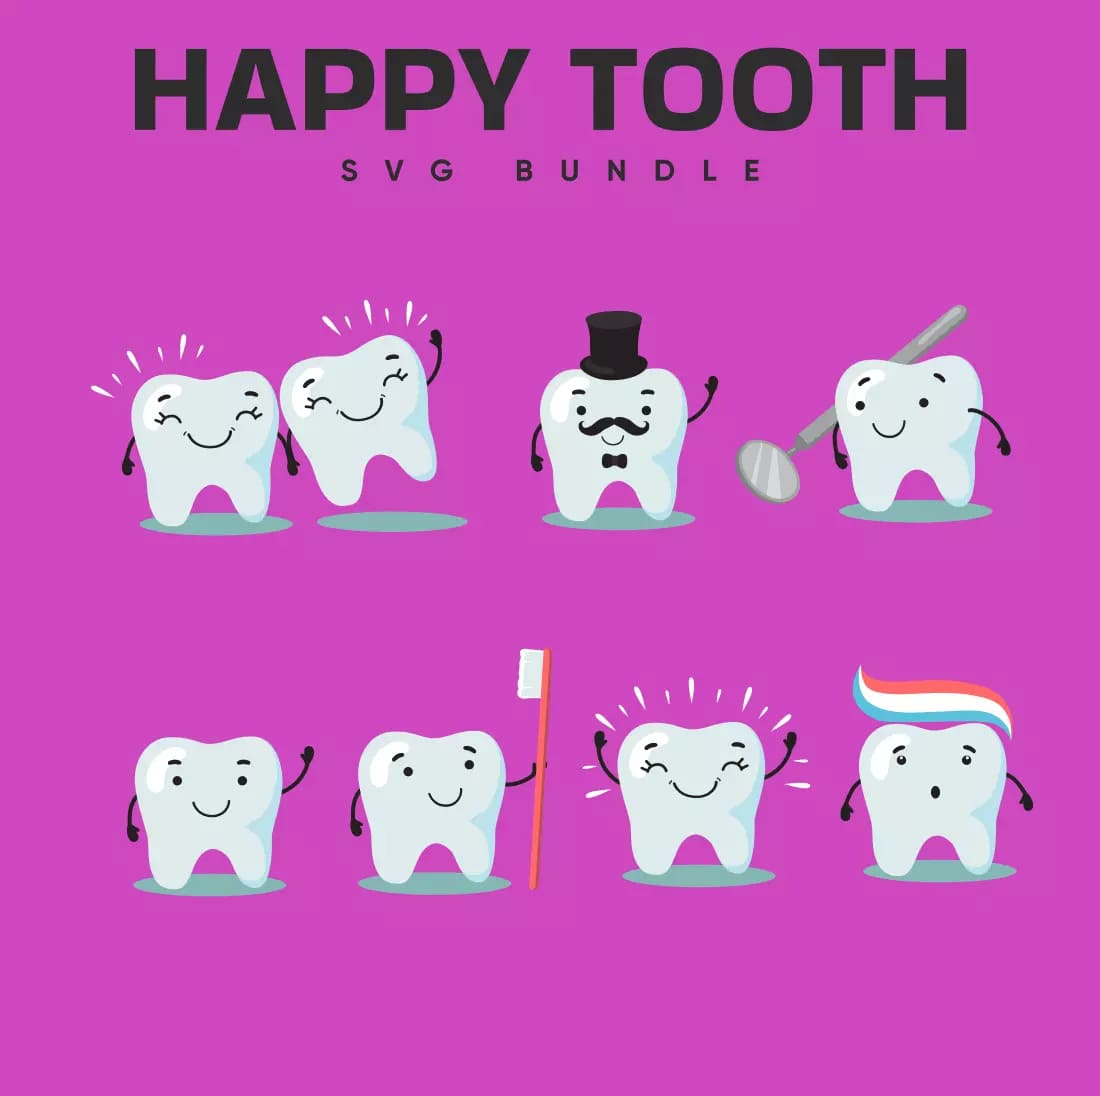 Happy Tooth SVG Bundle Preview.